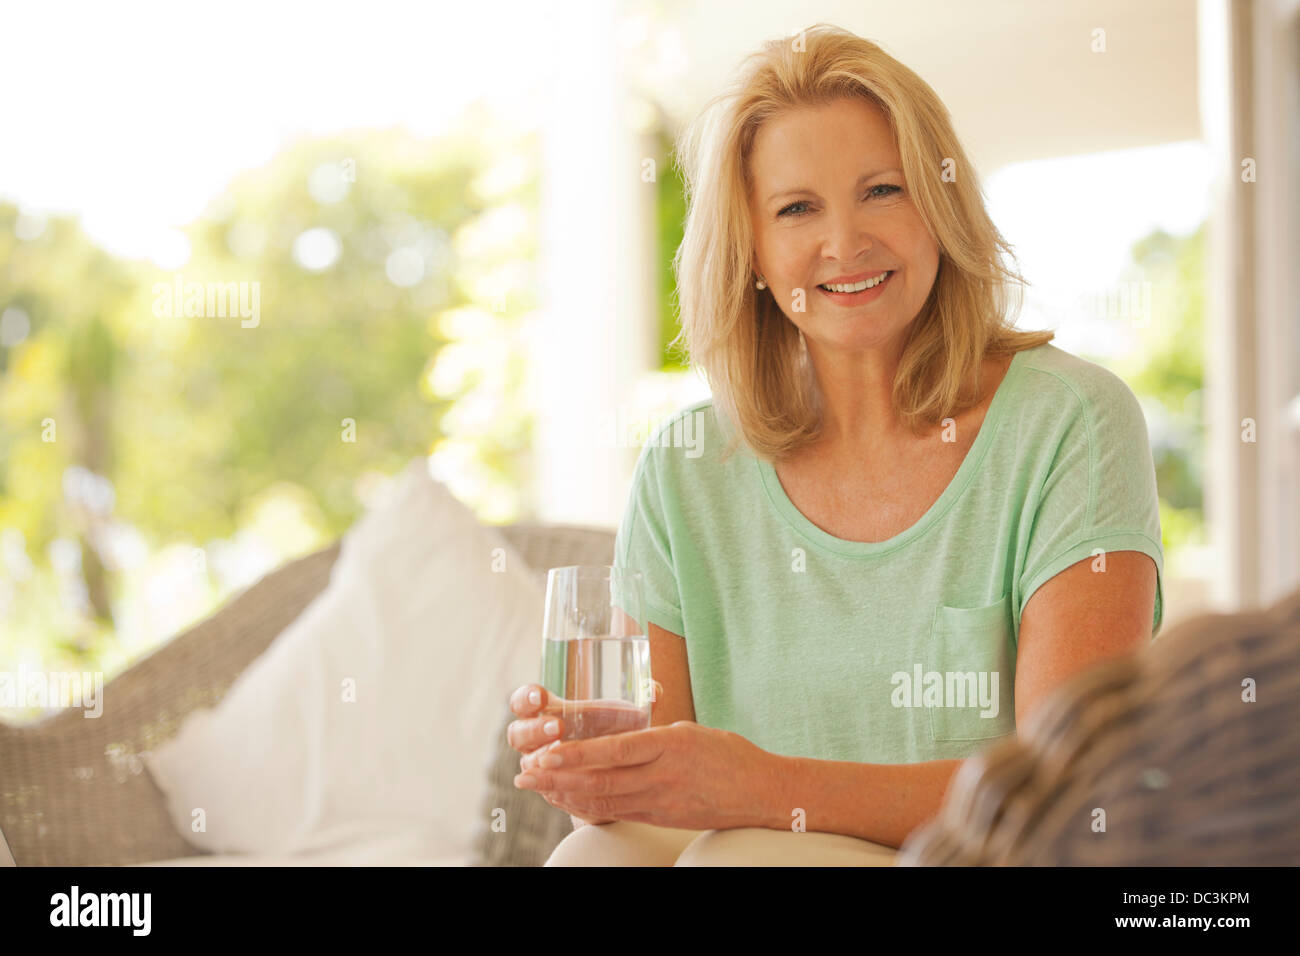 Portrait of smiling woman drinking water on patio Banque D'Images